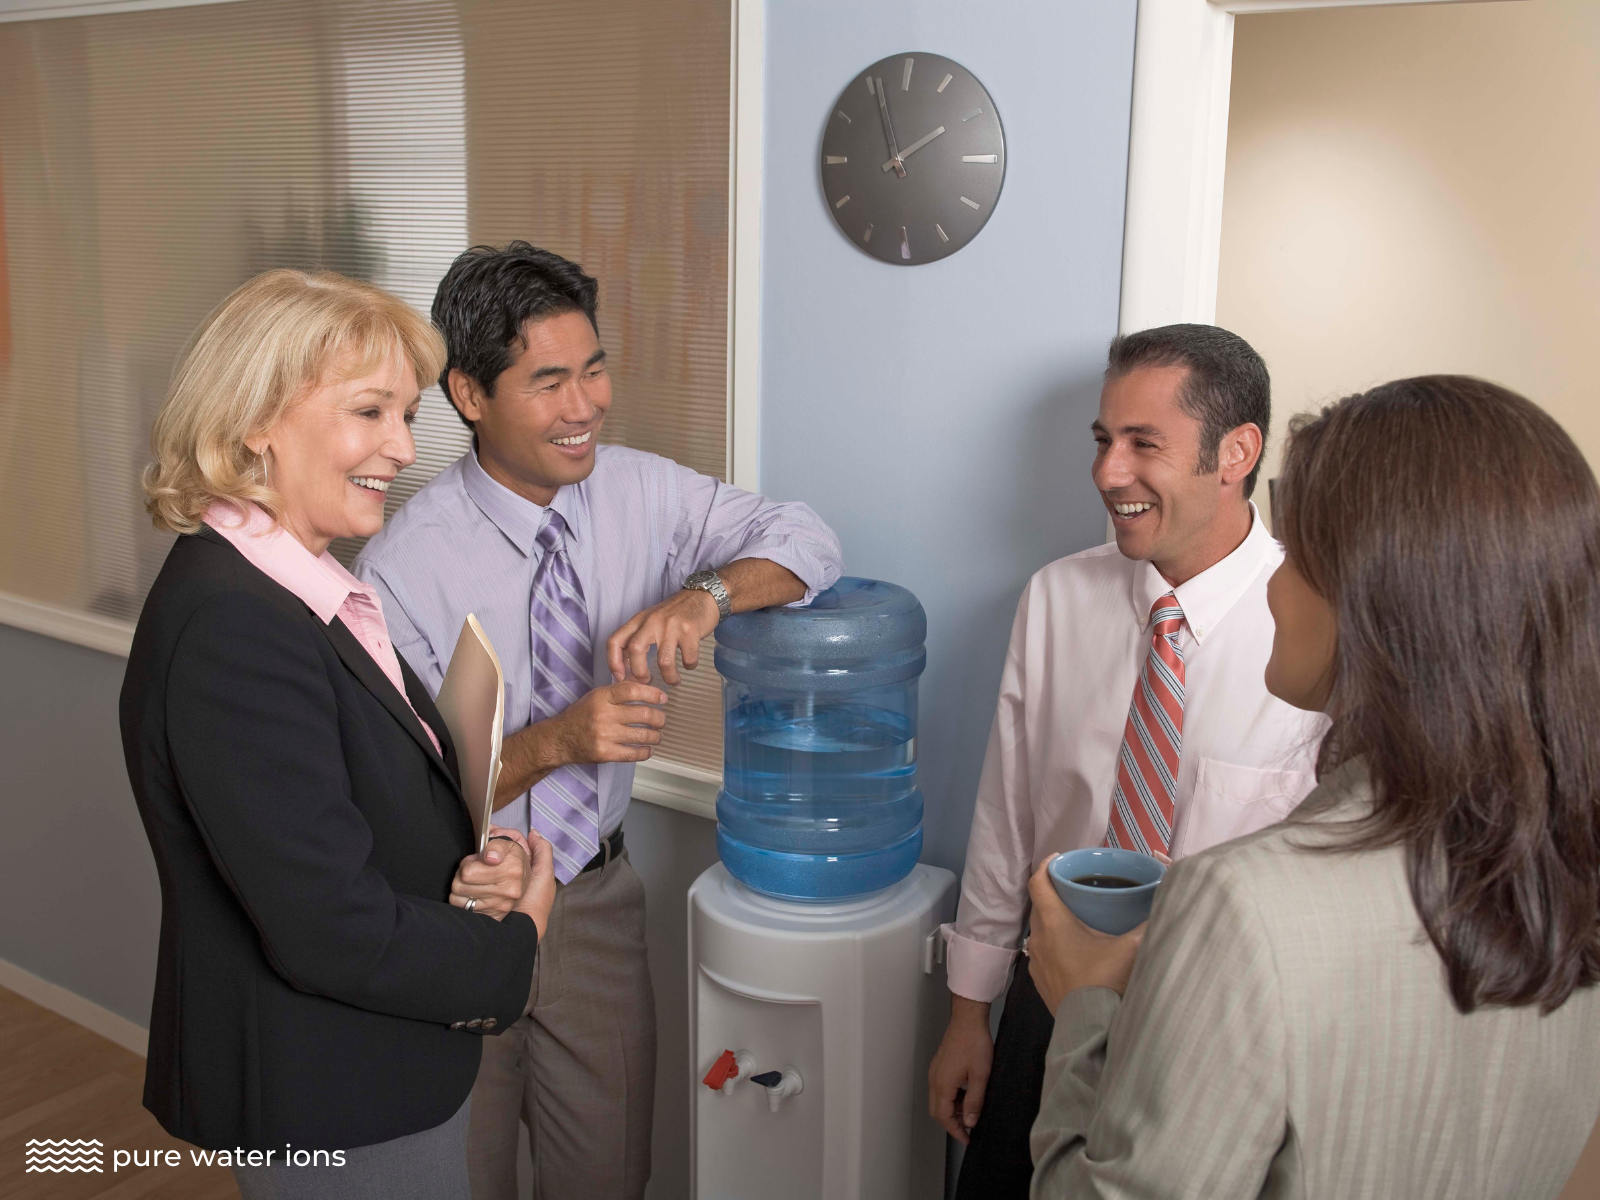 workers smiling and chatting at a water cooler